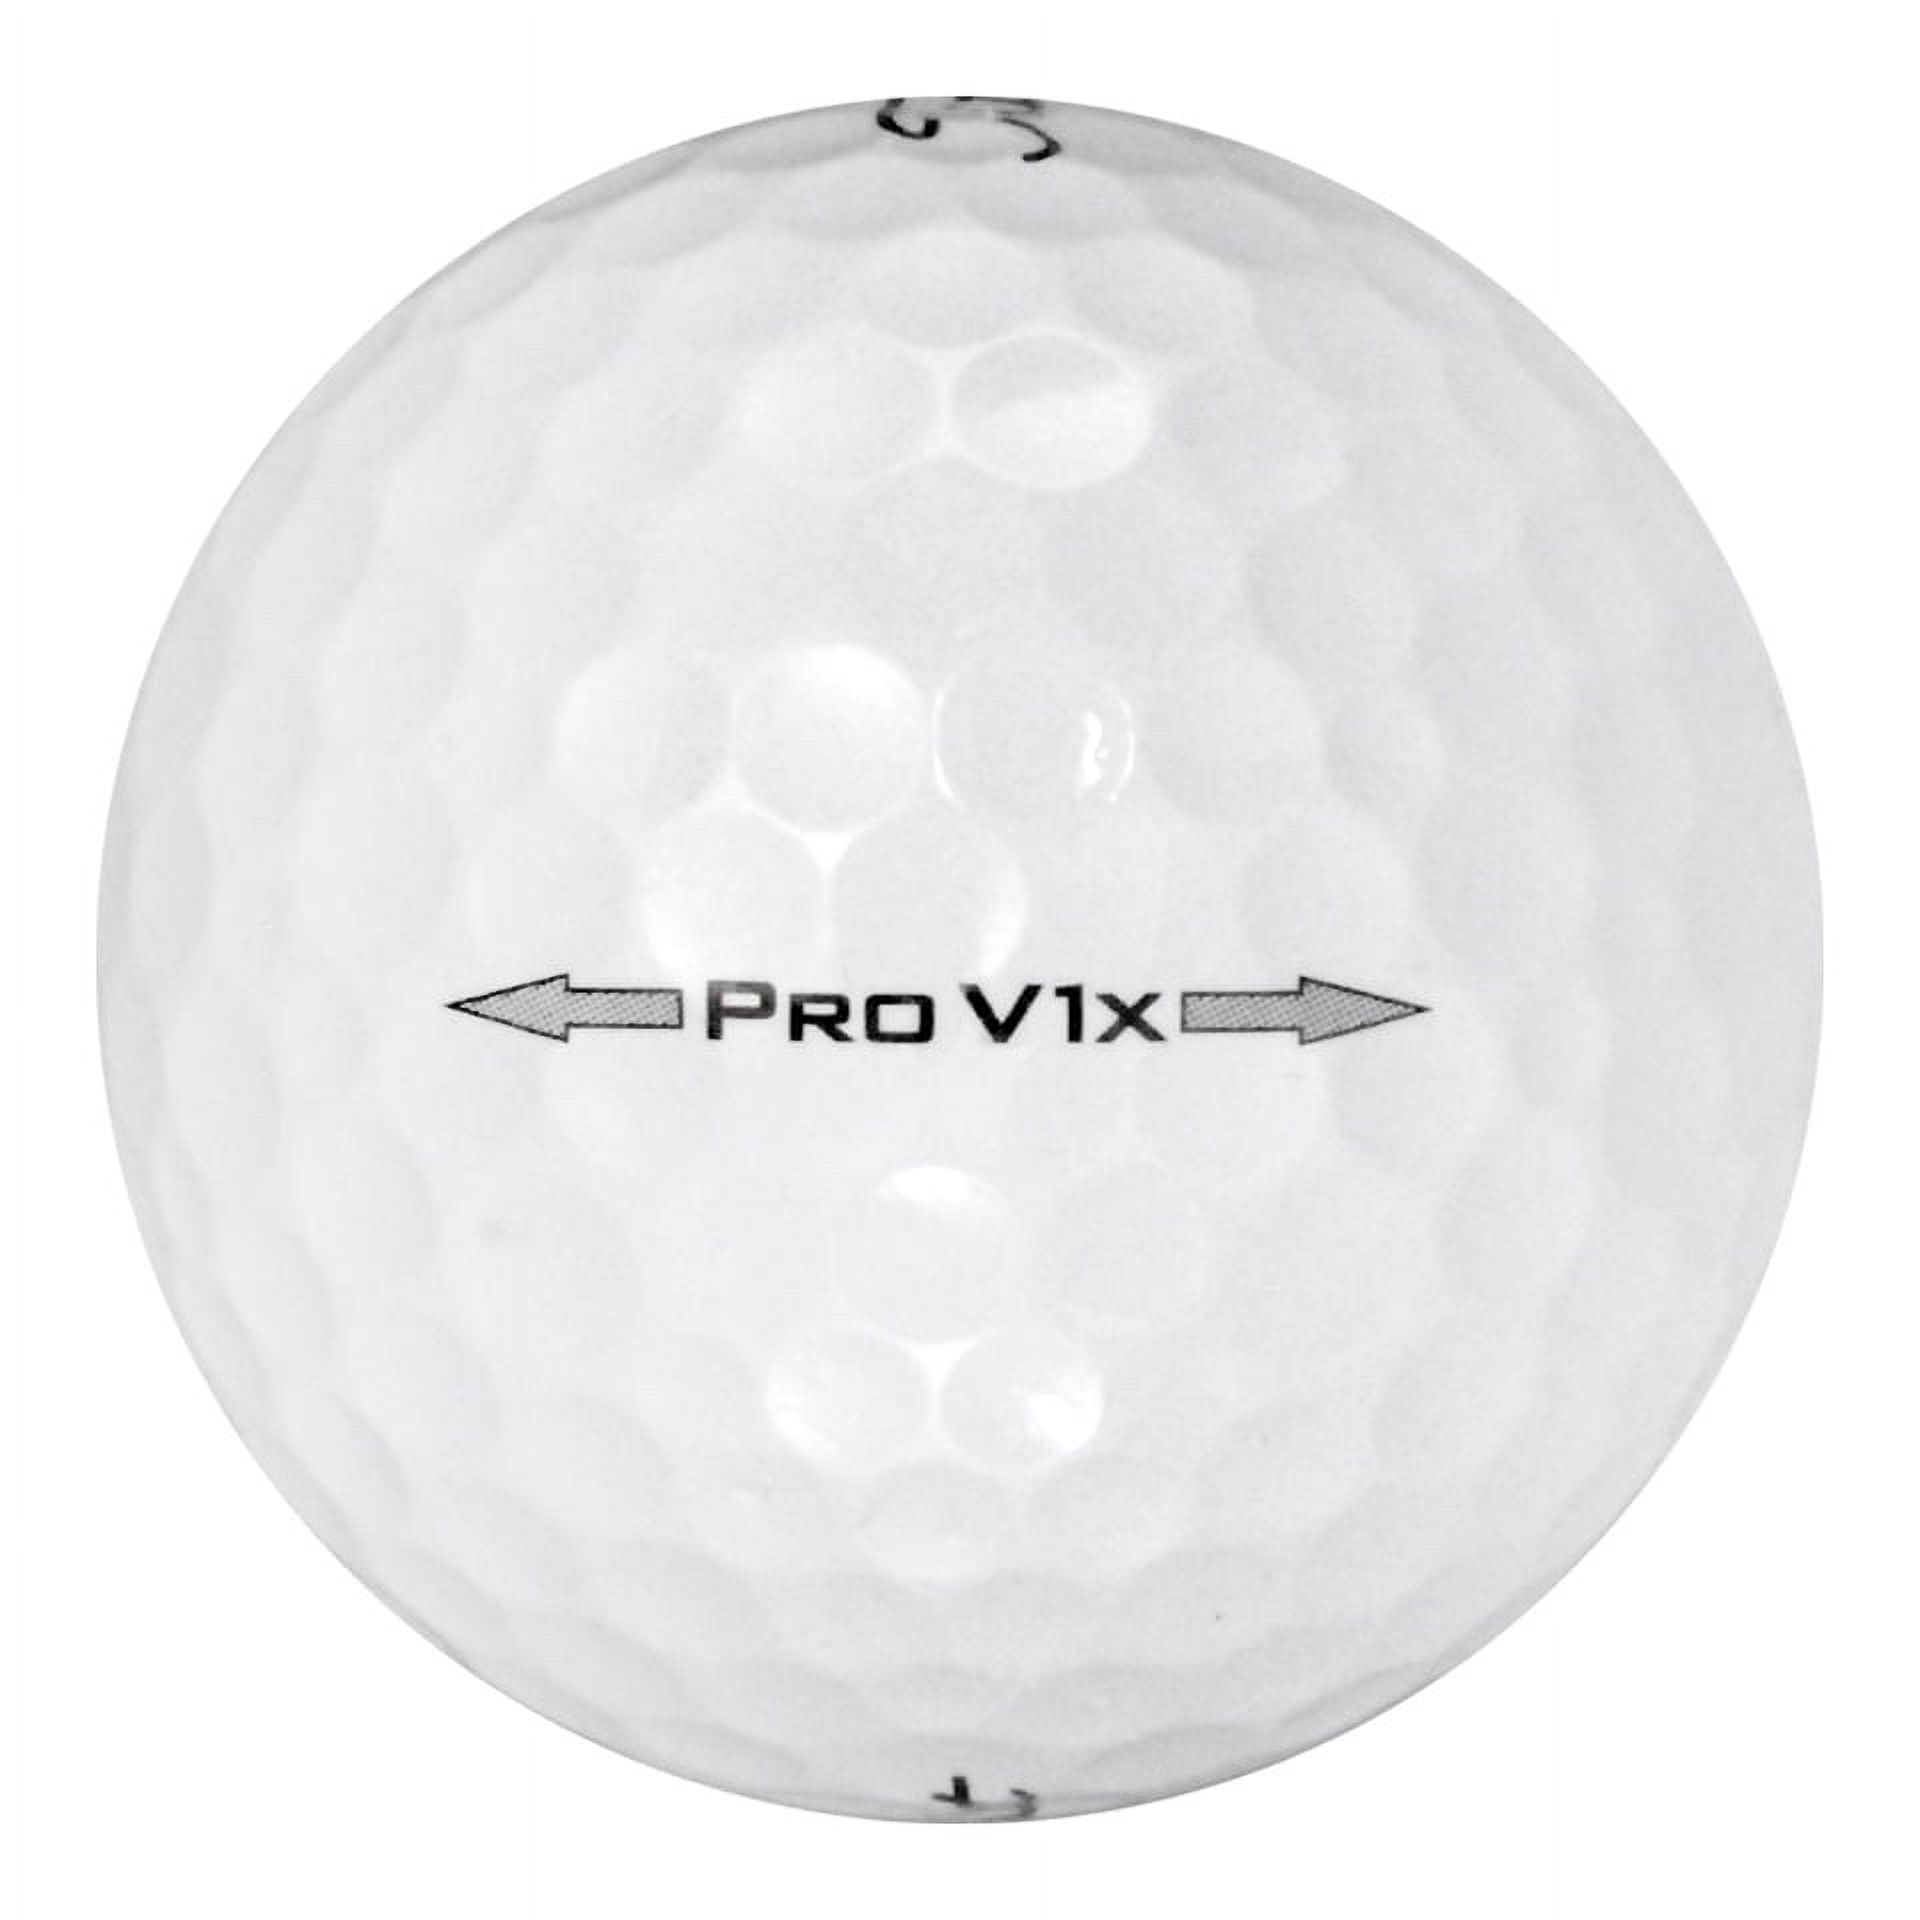 Titleist 2014 Pro V1x Golf Balls, Prior Generation, Used, Good Quality, 100 Pack - image 1 of 8